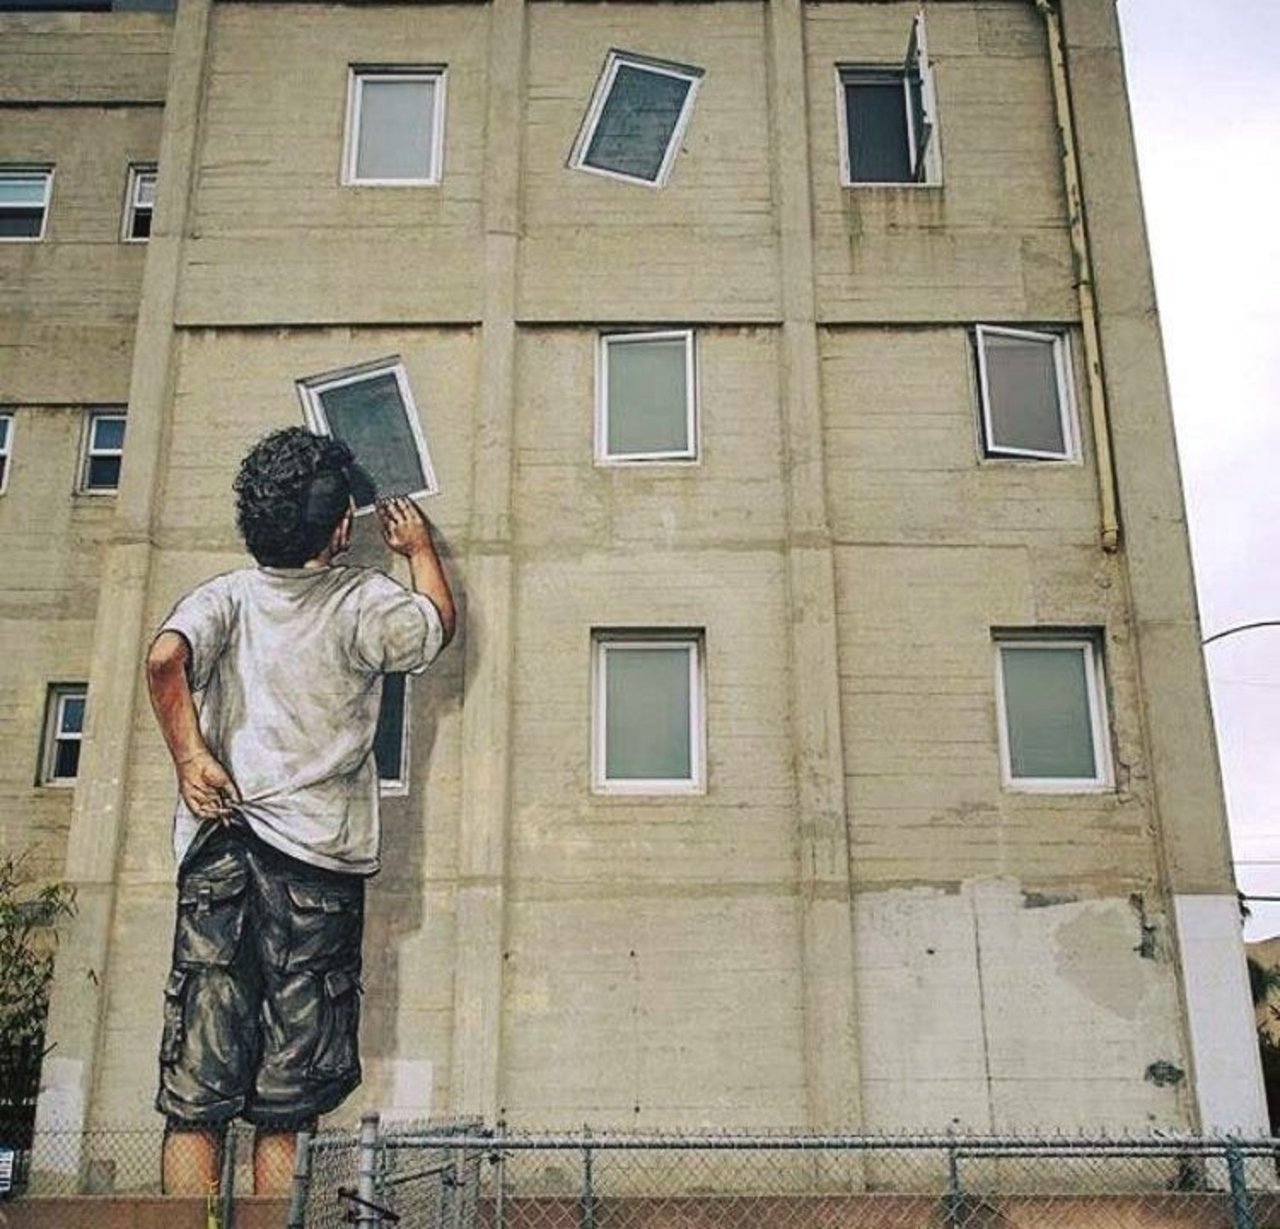 Youth curiosity – #streetart – Be ▲rtist – Be ▲rt Magazine https://beartistbeart.com/2016/07/21/youth-curiosity-streetart/?utm_campaign=crowdfire&utm_content=crowdfire&utm_medium=social&utm_source=twitter https://t.co/SIFJi9m229